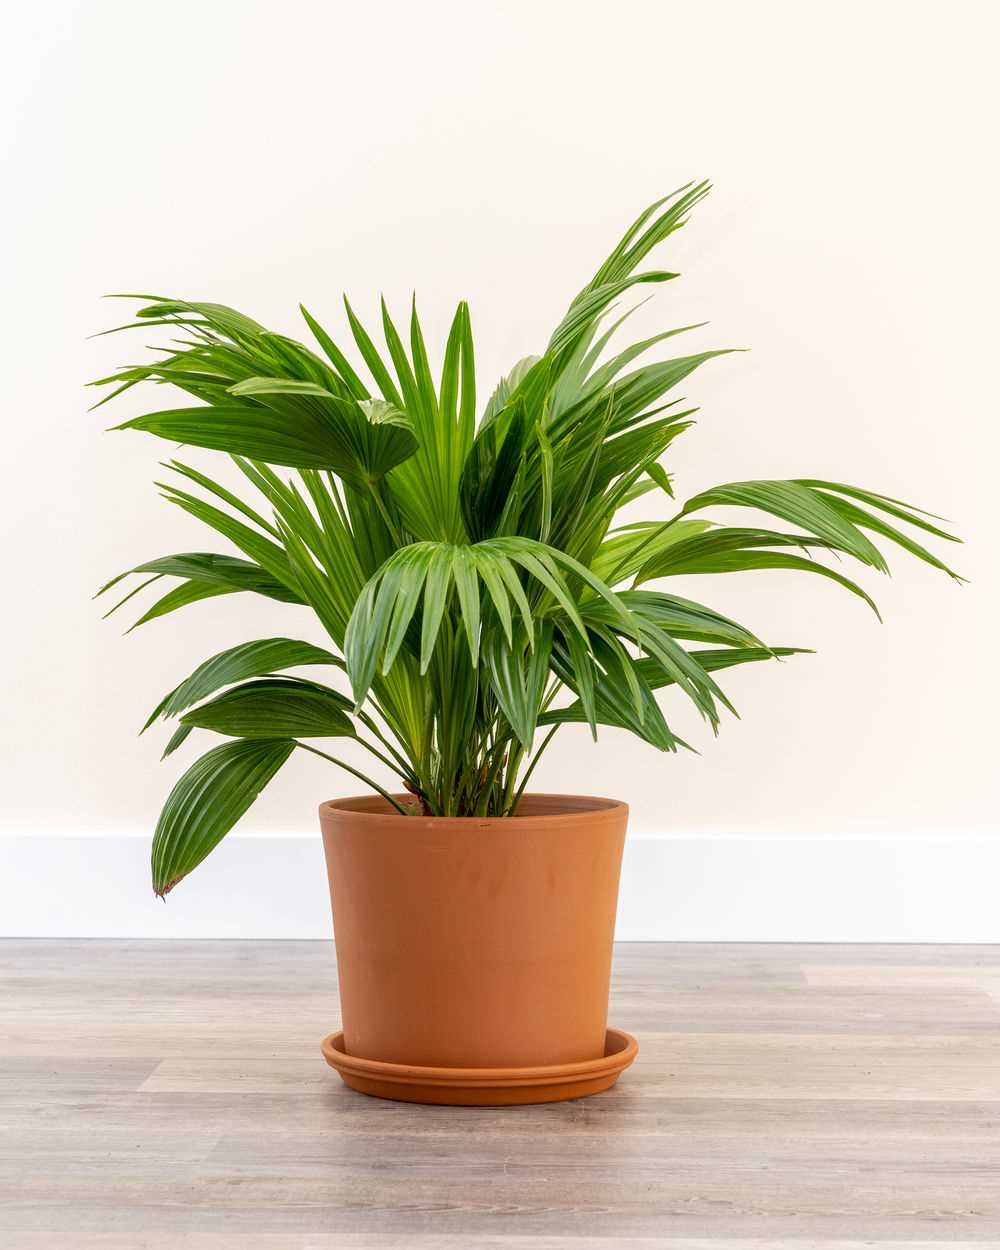 How to Care for Fan Palm